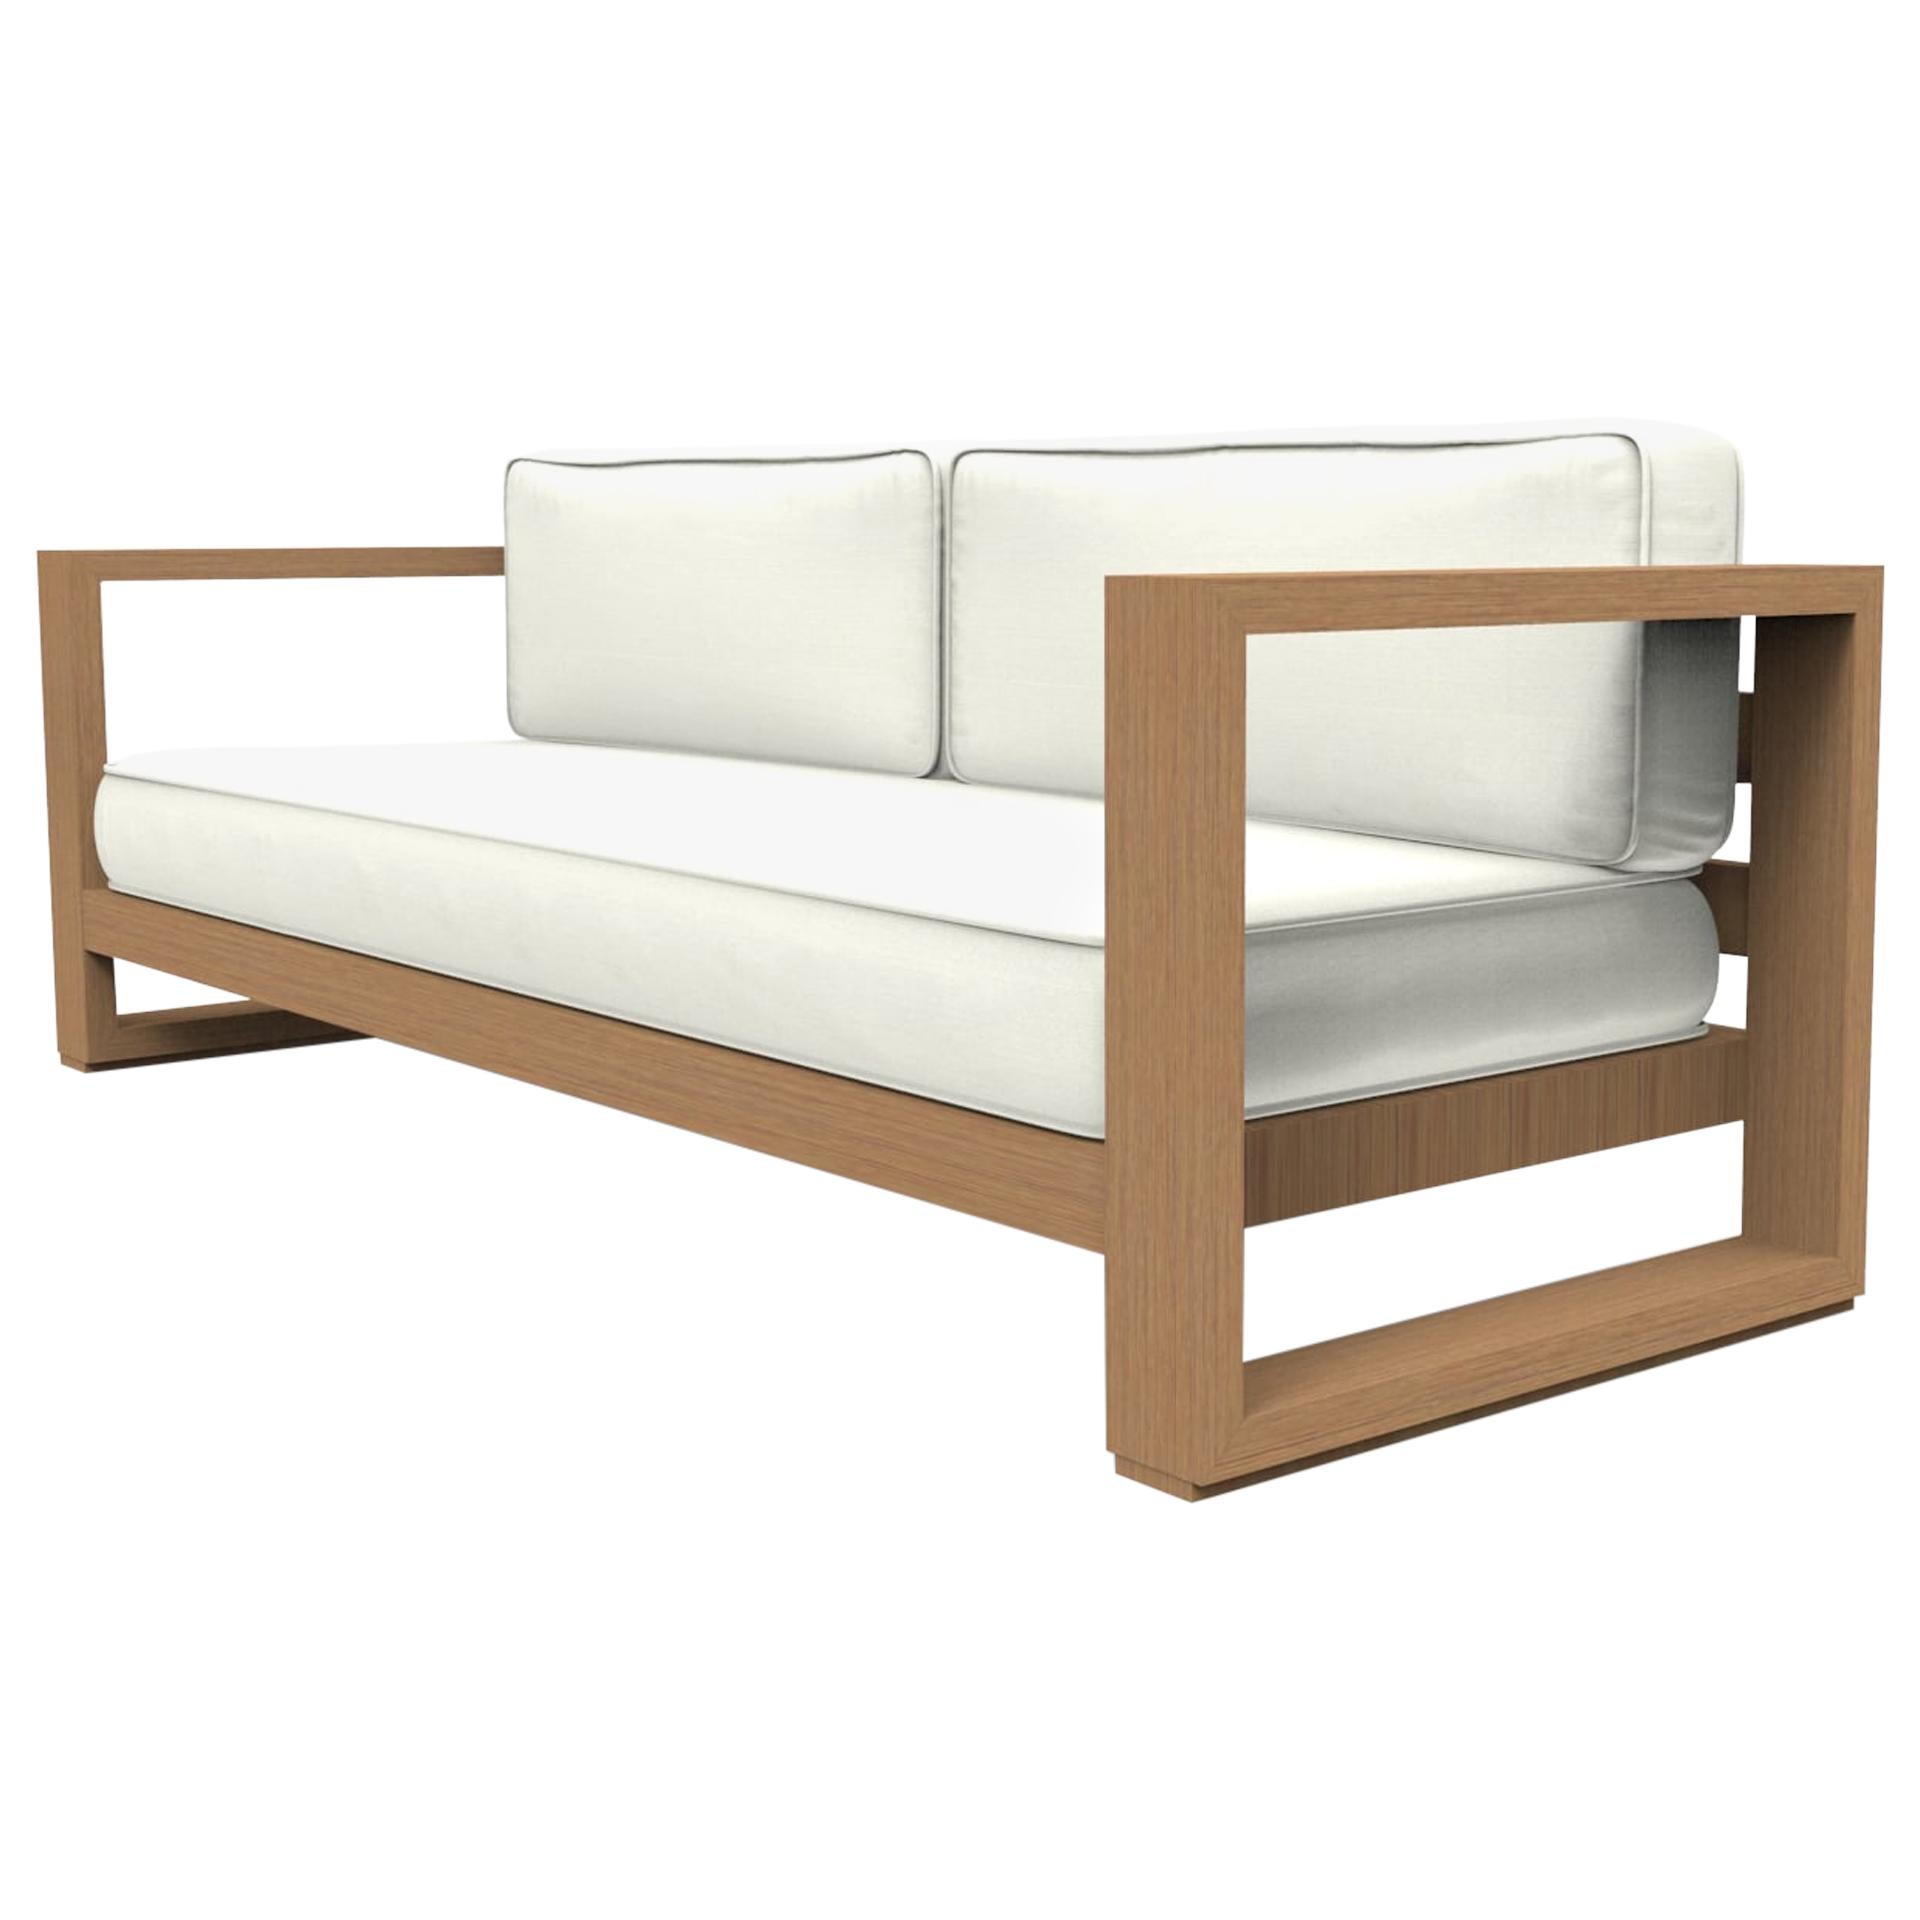 Brixton Teak Sofa 'Grade a' Wire Brushed Natural Wood, Canvas Natural For Sale